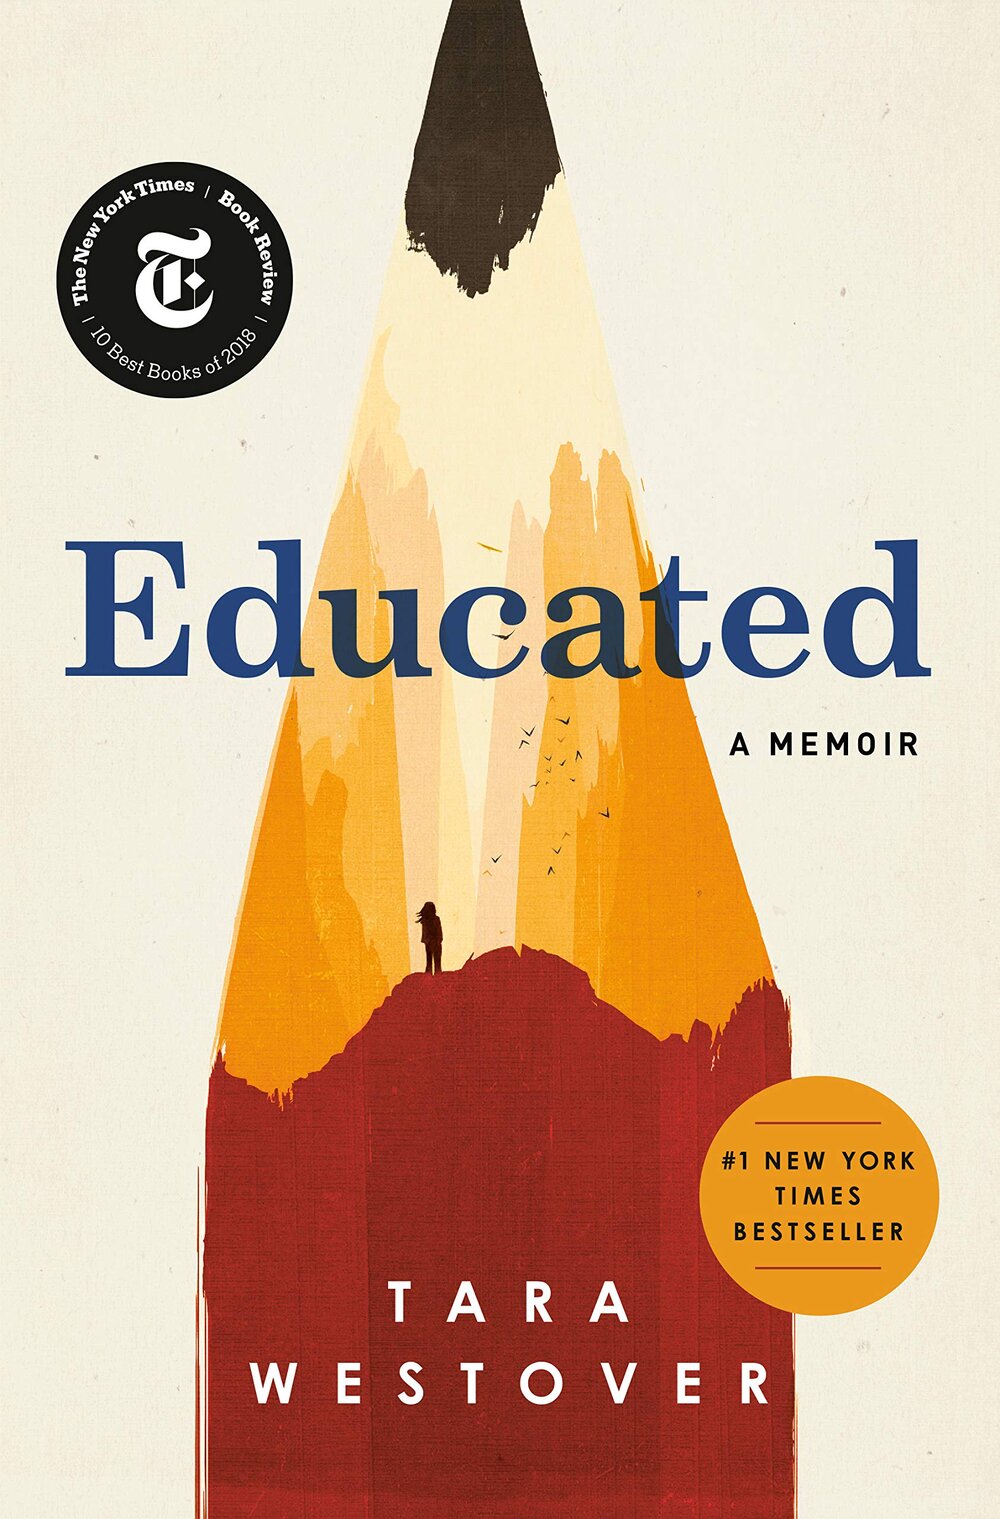   Educated  is an account of the struggle for self-invention. It is a tale of fierce family loyalty and of the grief that comes with severing the closest of ties. With the acute insight that distinguishes all great writers, Westover has crafted a uni